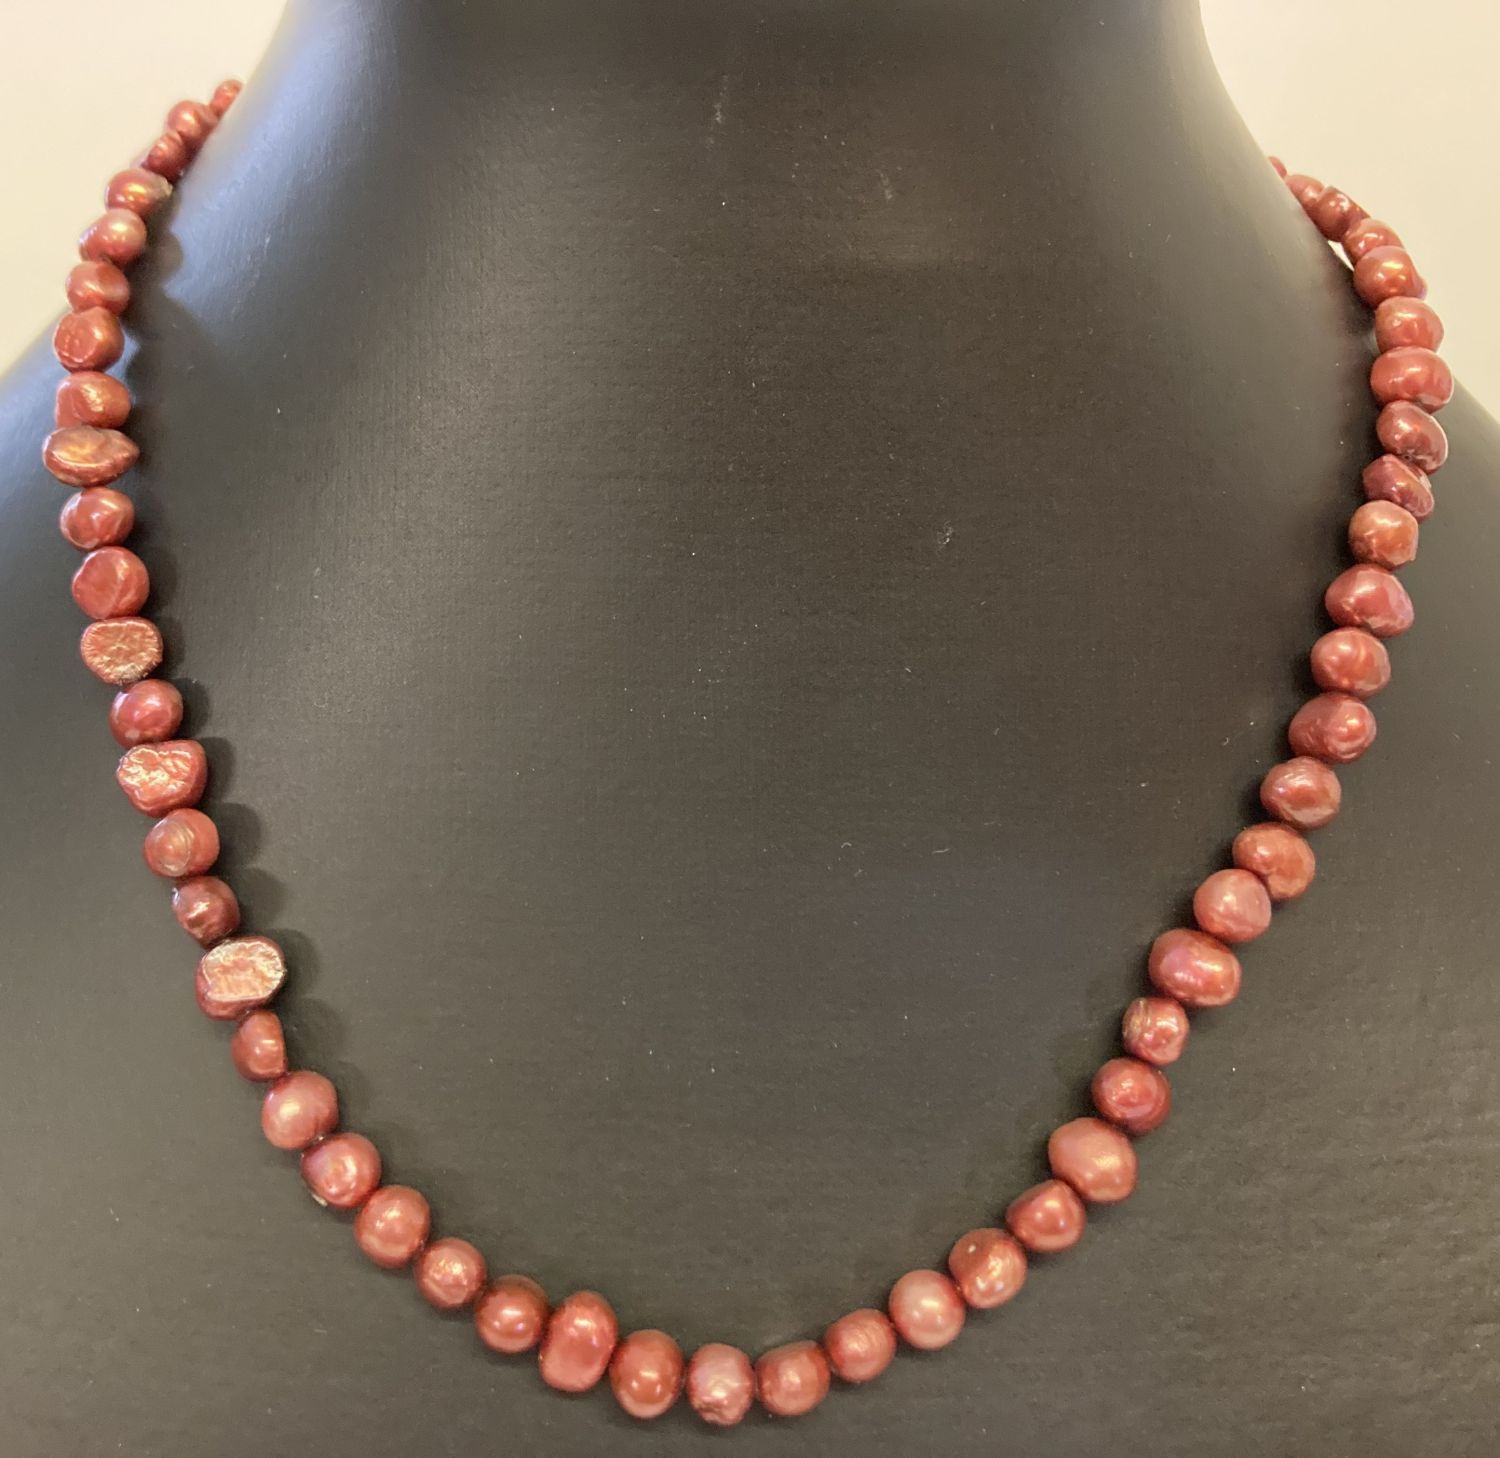 A 15" dyed freshwater pearl necklace with silver tone magnetic barrel clasp.